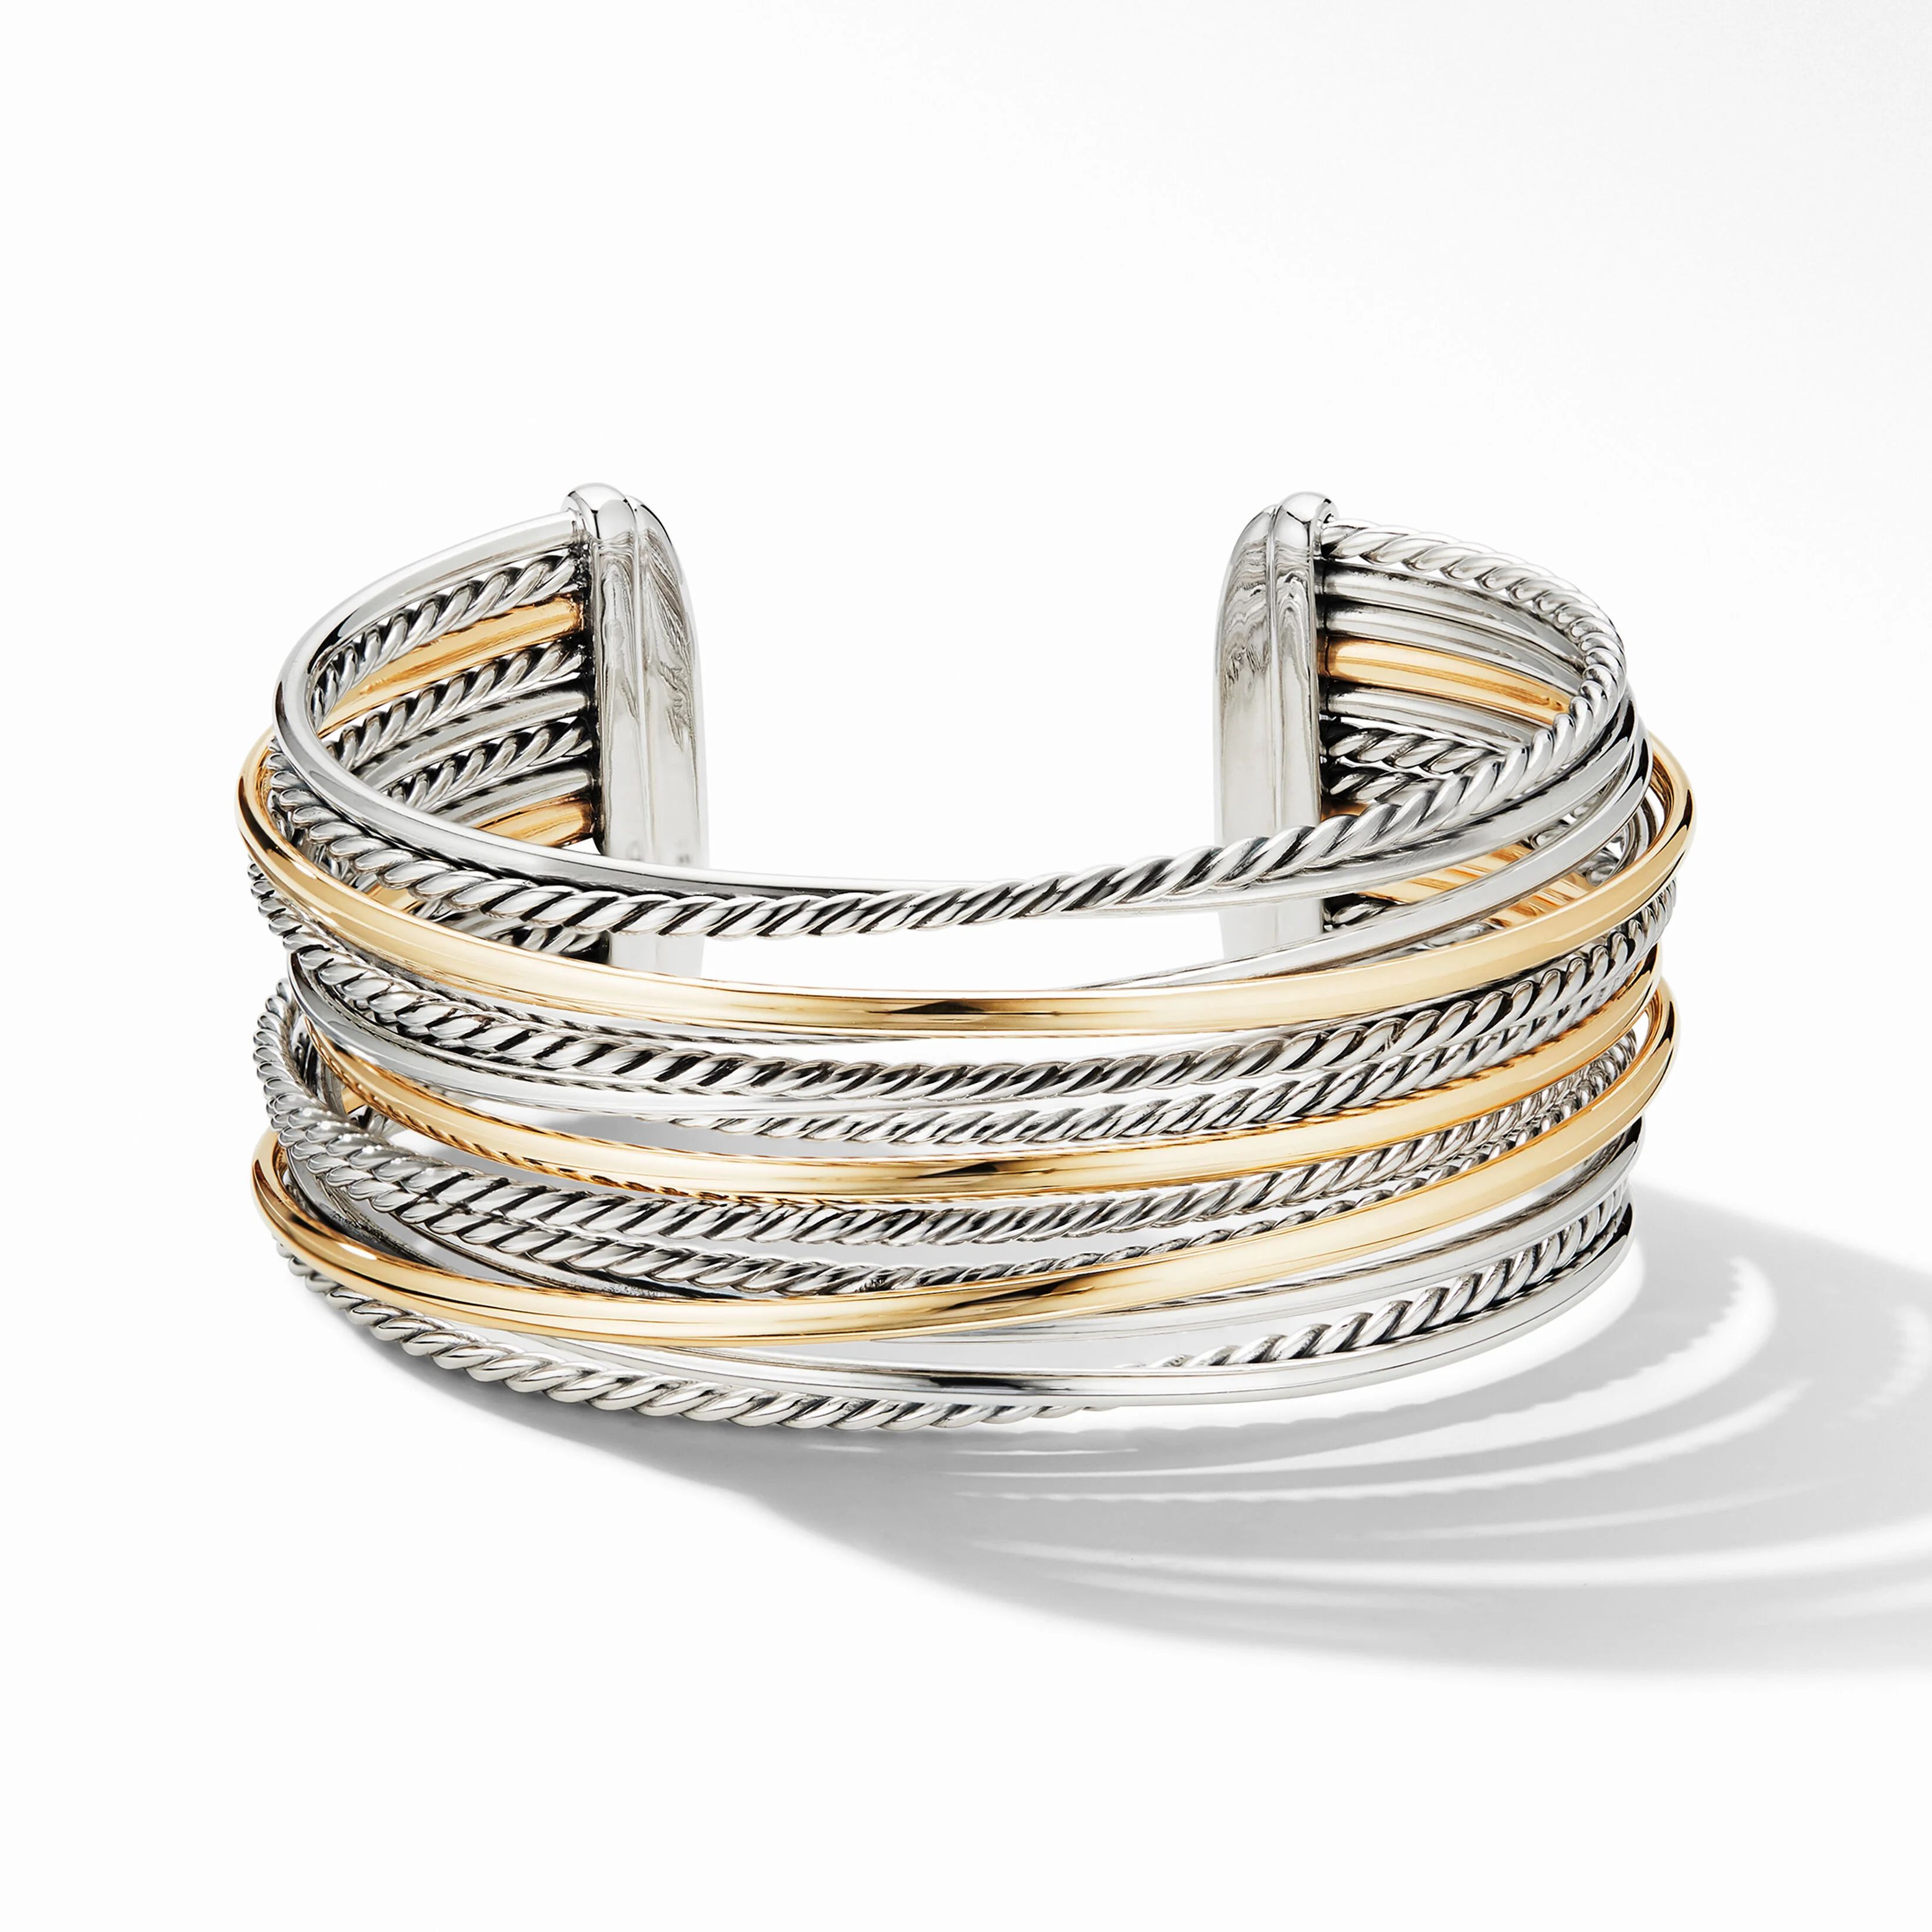 Crossover Cuff Bracelet in Sterling Silver with 18K Yellow Gold | David Yurman